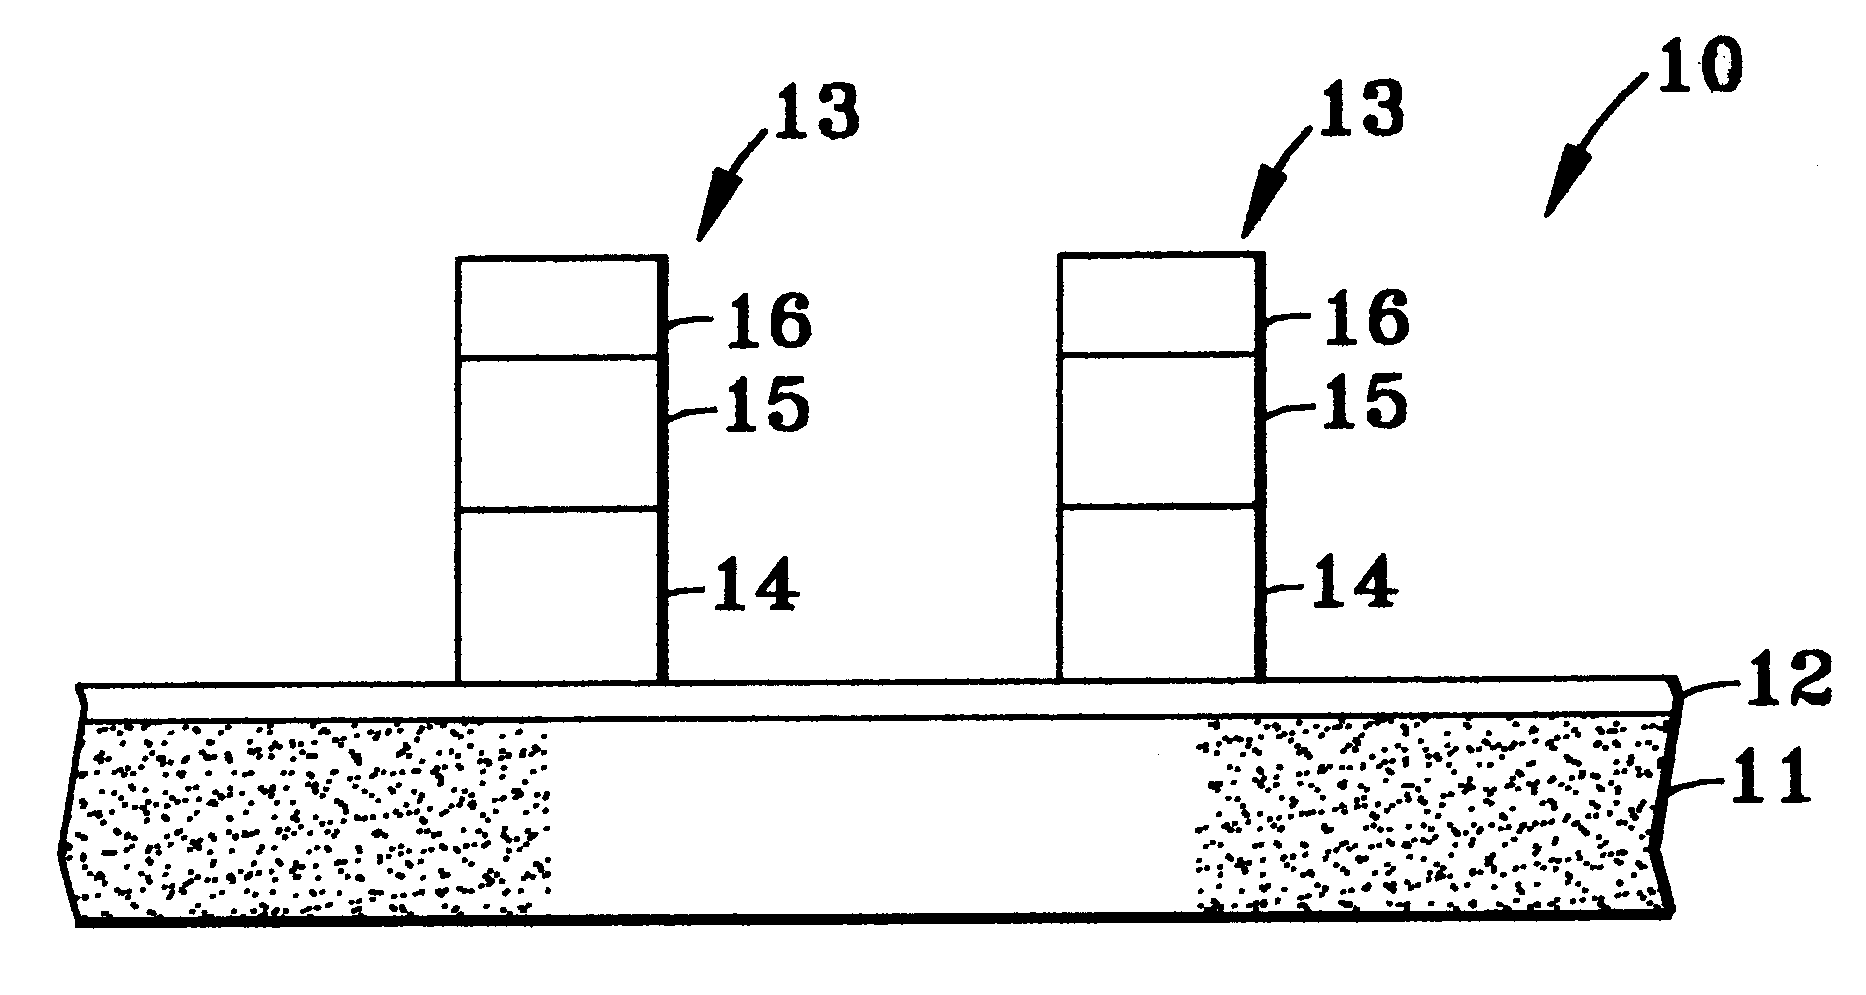 Method of plasma etching the tungsten silicide layer in the gate conductor stack formation